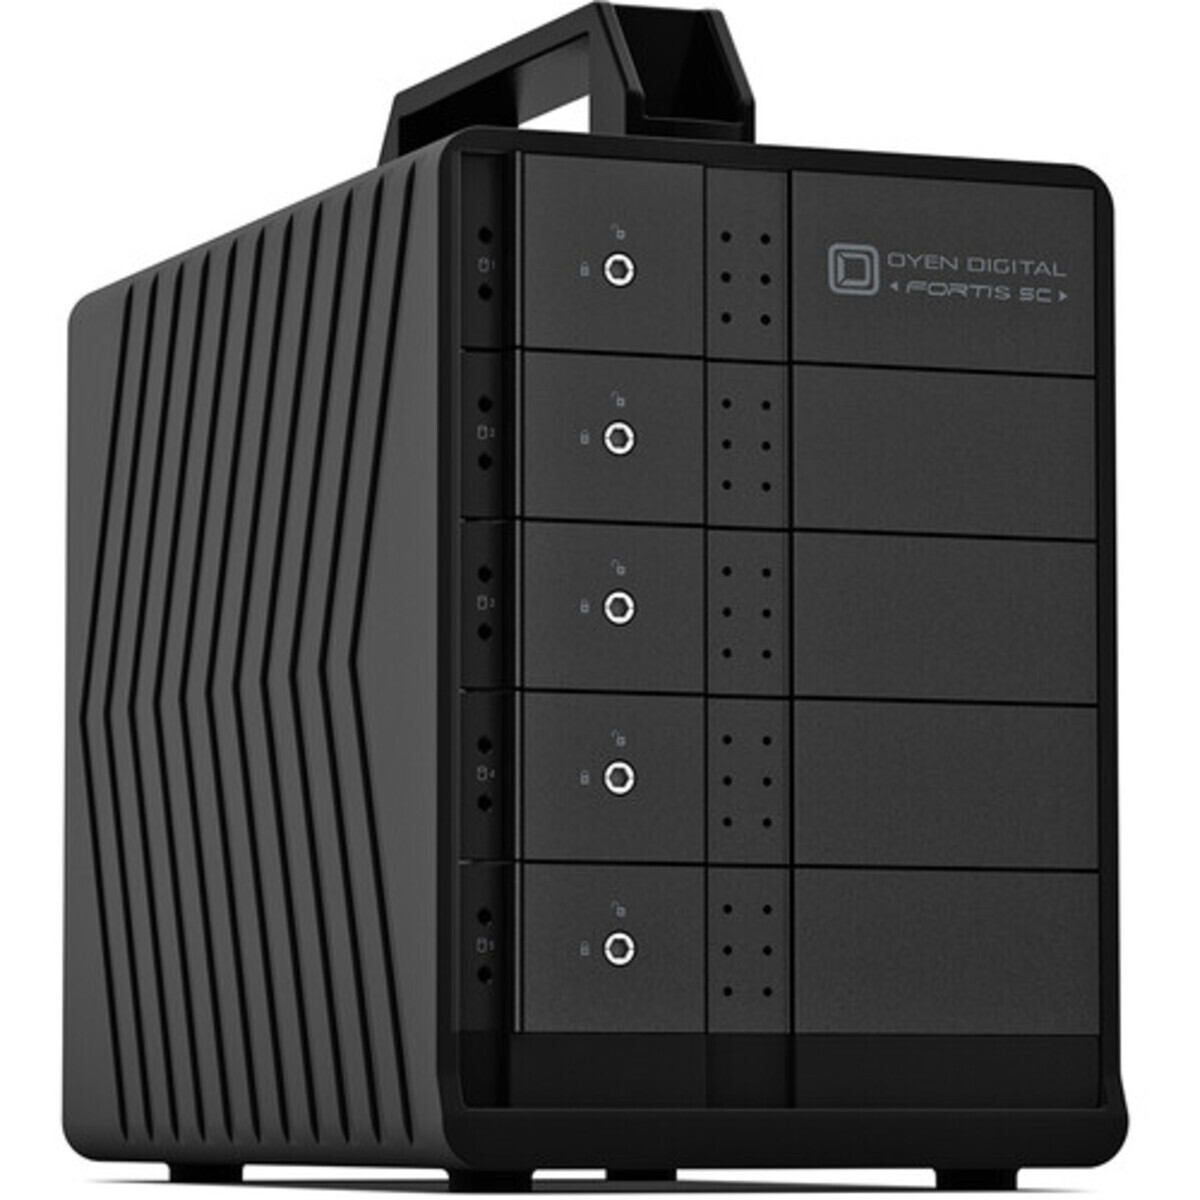 buy OYEN Fortis 5C 20tb Desktop DAS - Direct Attached Storage Device 5x4000gb Toshiba MN Series MN08ADA400E 3.5 7200rpm SATA 6Gb/s HDD NAS Class Drives Installed - Burn-In Tested - ON SALE - nas headquarters buy network attached storage server device das new raid-5 free shipping simply usa christmas holiday black friday cyber monday week sale happening now! Fortis 5C